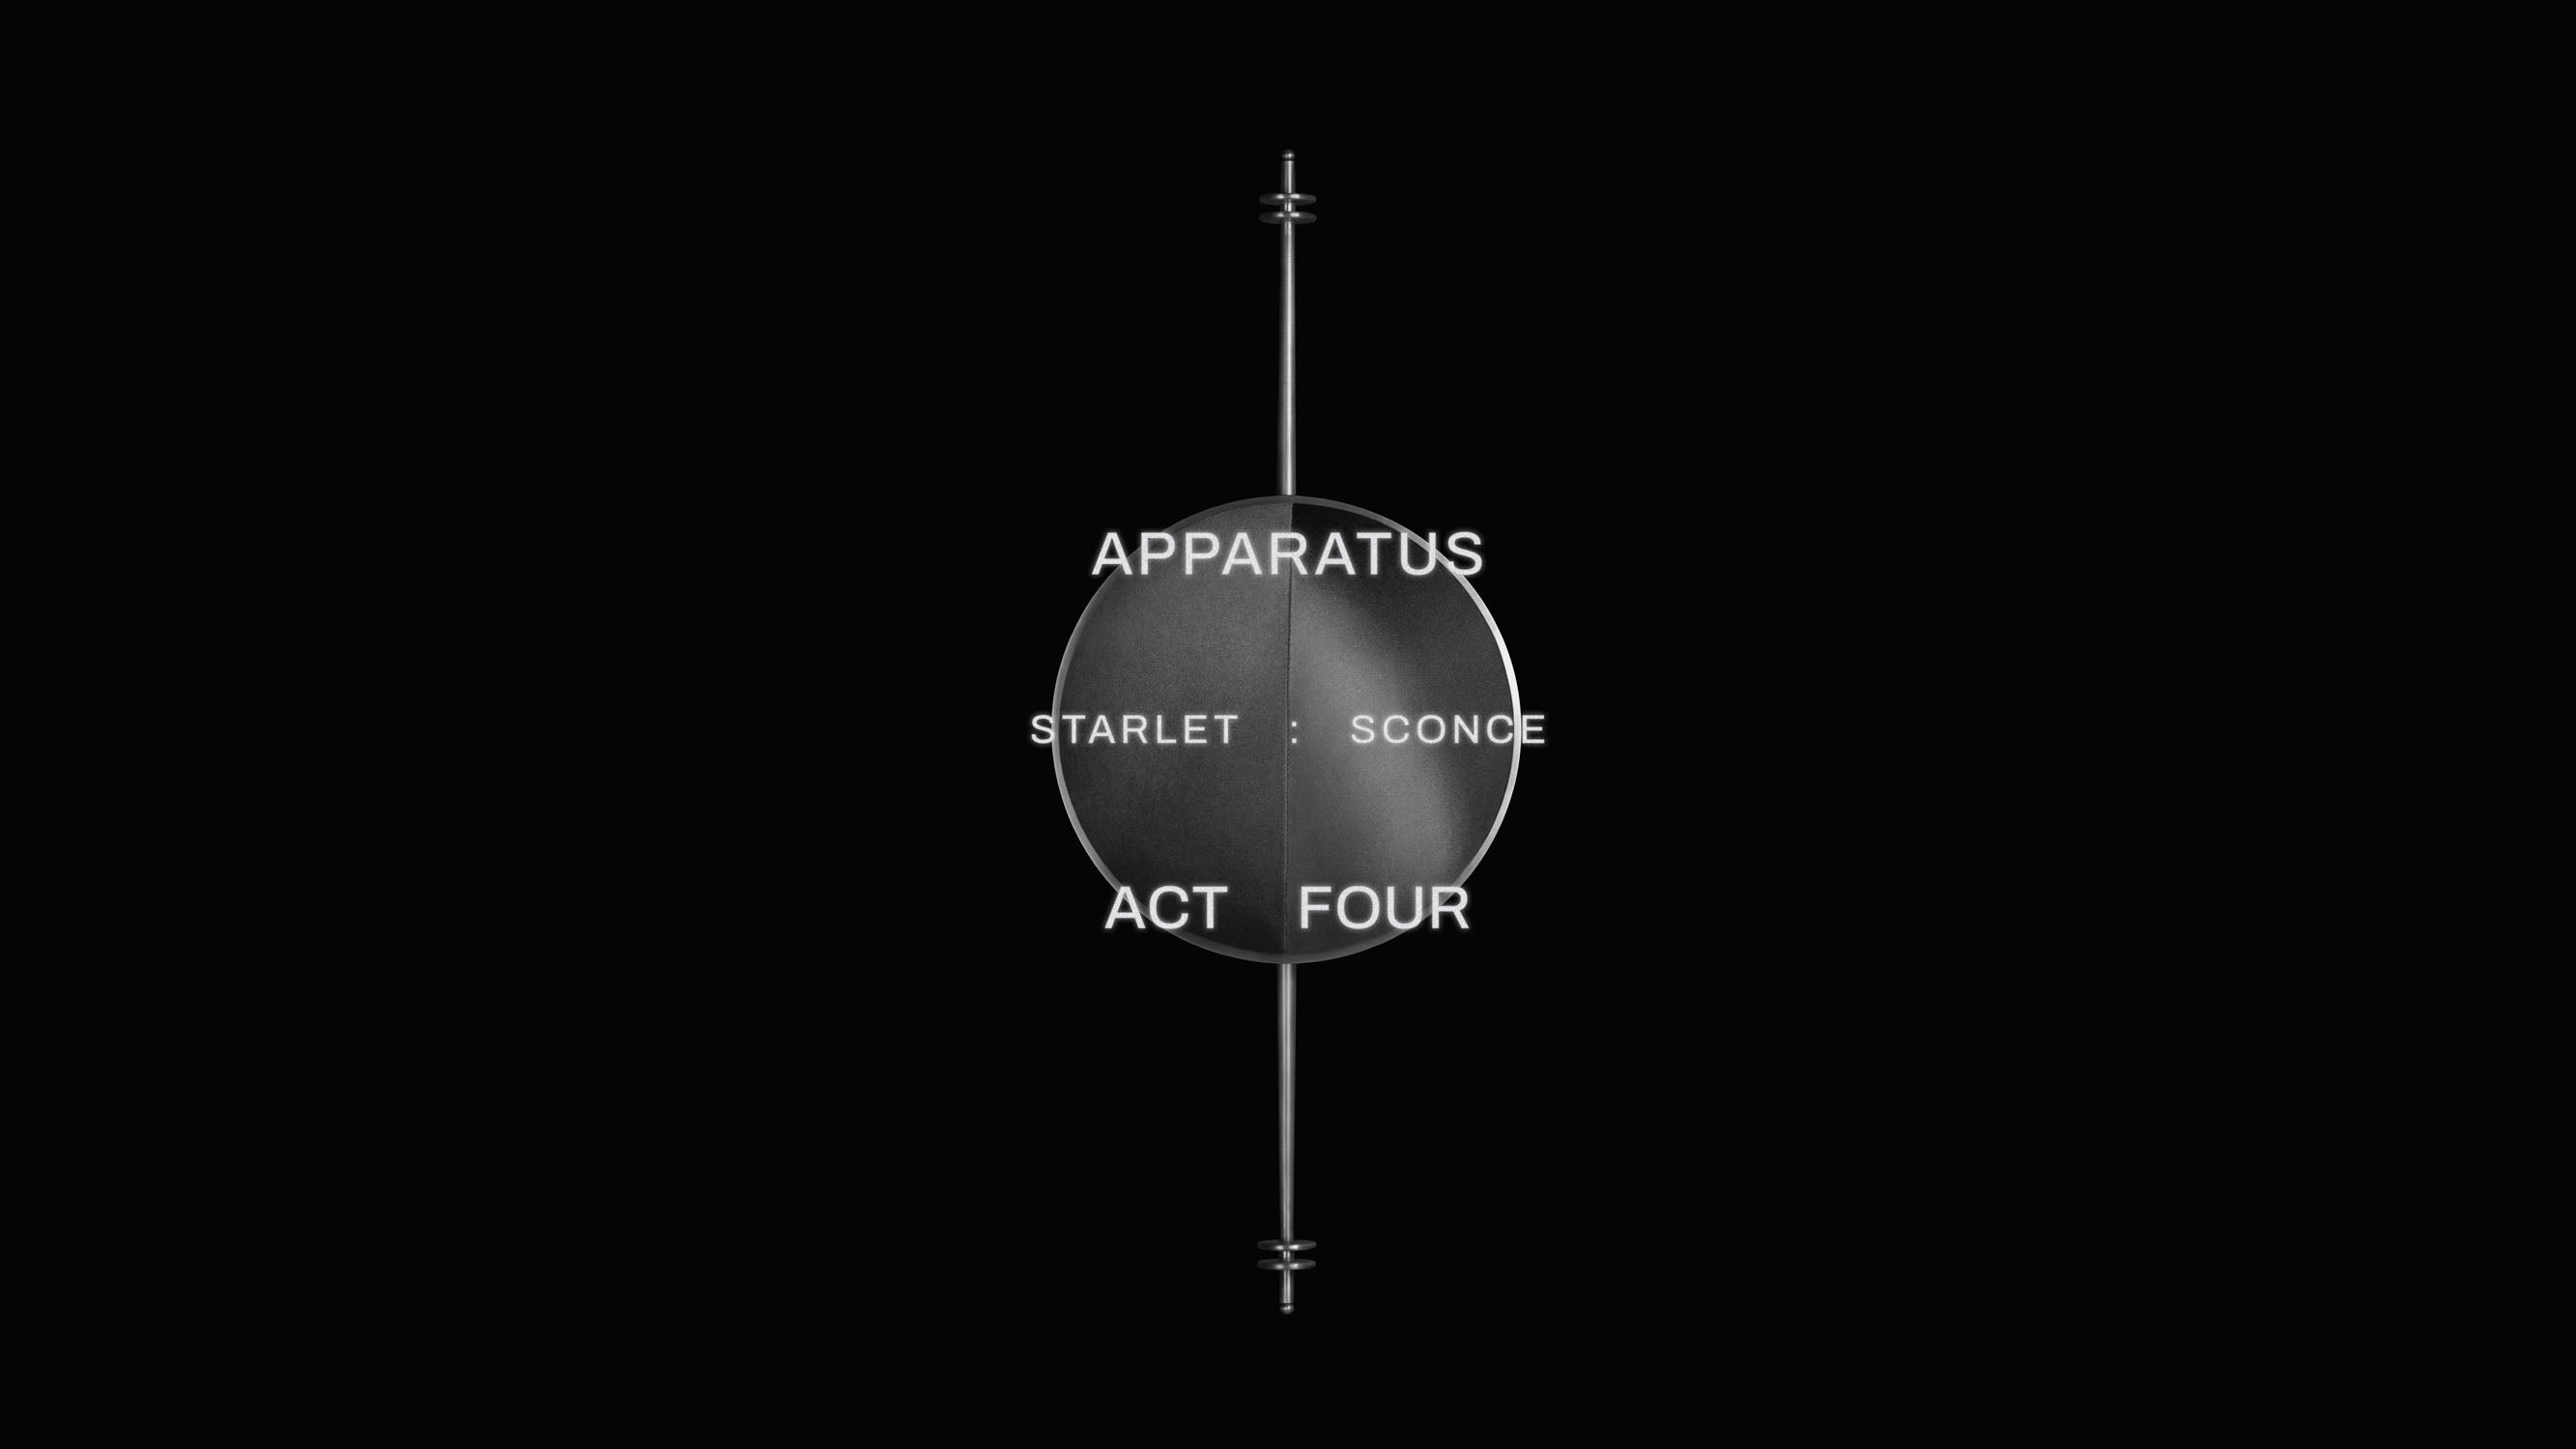 APPARATUS ACT FOUR includes the STARLET : SCONCE. 